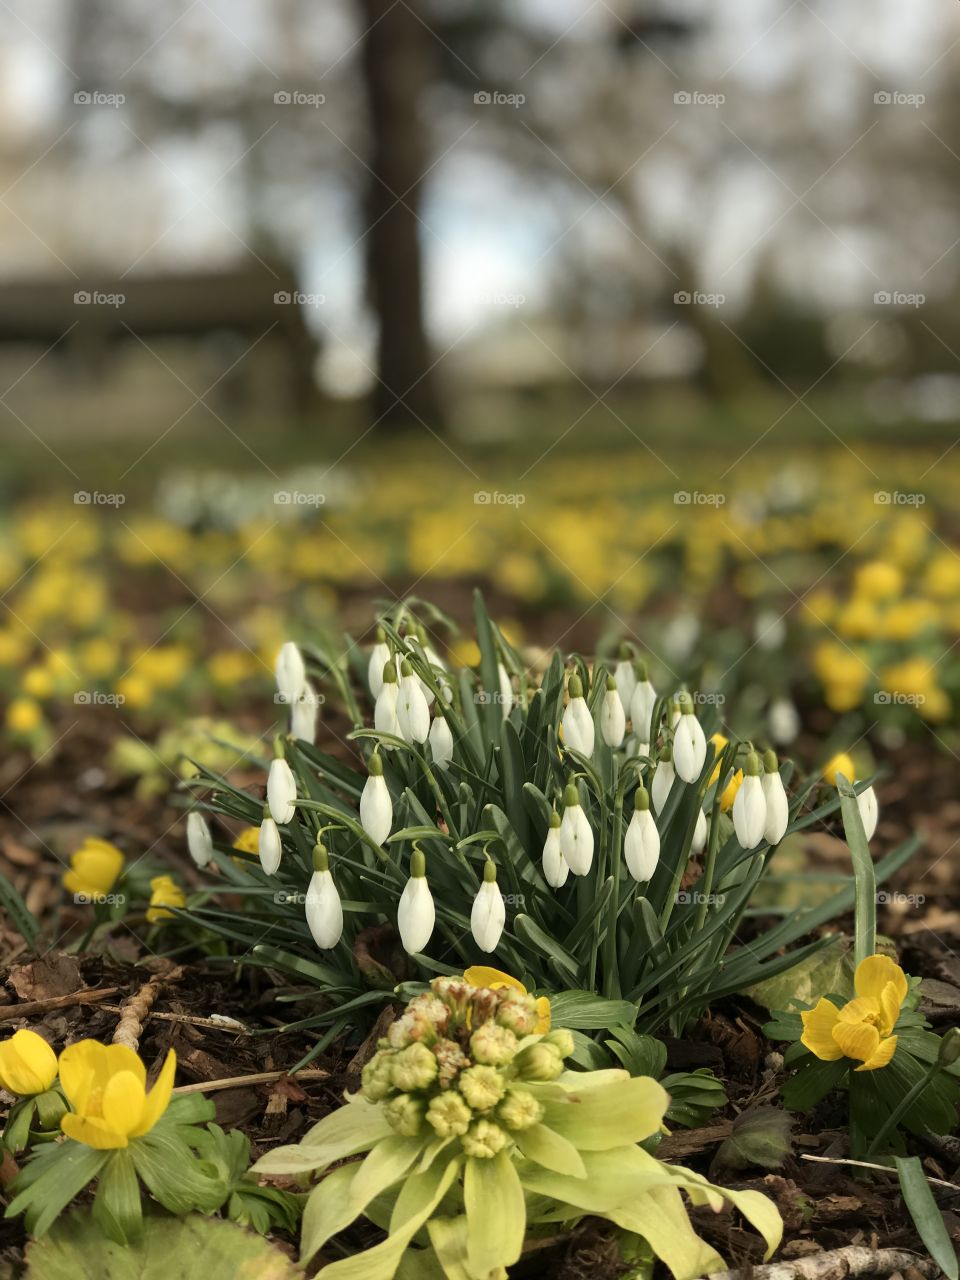 Clumps of Galanthus (Snowdrops) surrounded by yellow Aconite blossoming in a garden bed at a favourite park. A just emerging Leontopodium is immediately in front of the Snowdrops. Park buildings and still leafless trees can be seen in the background.